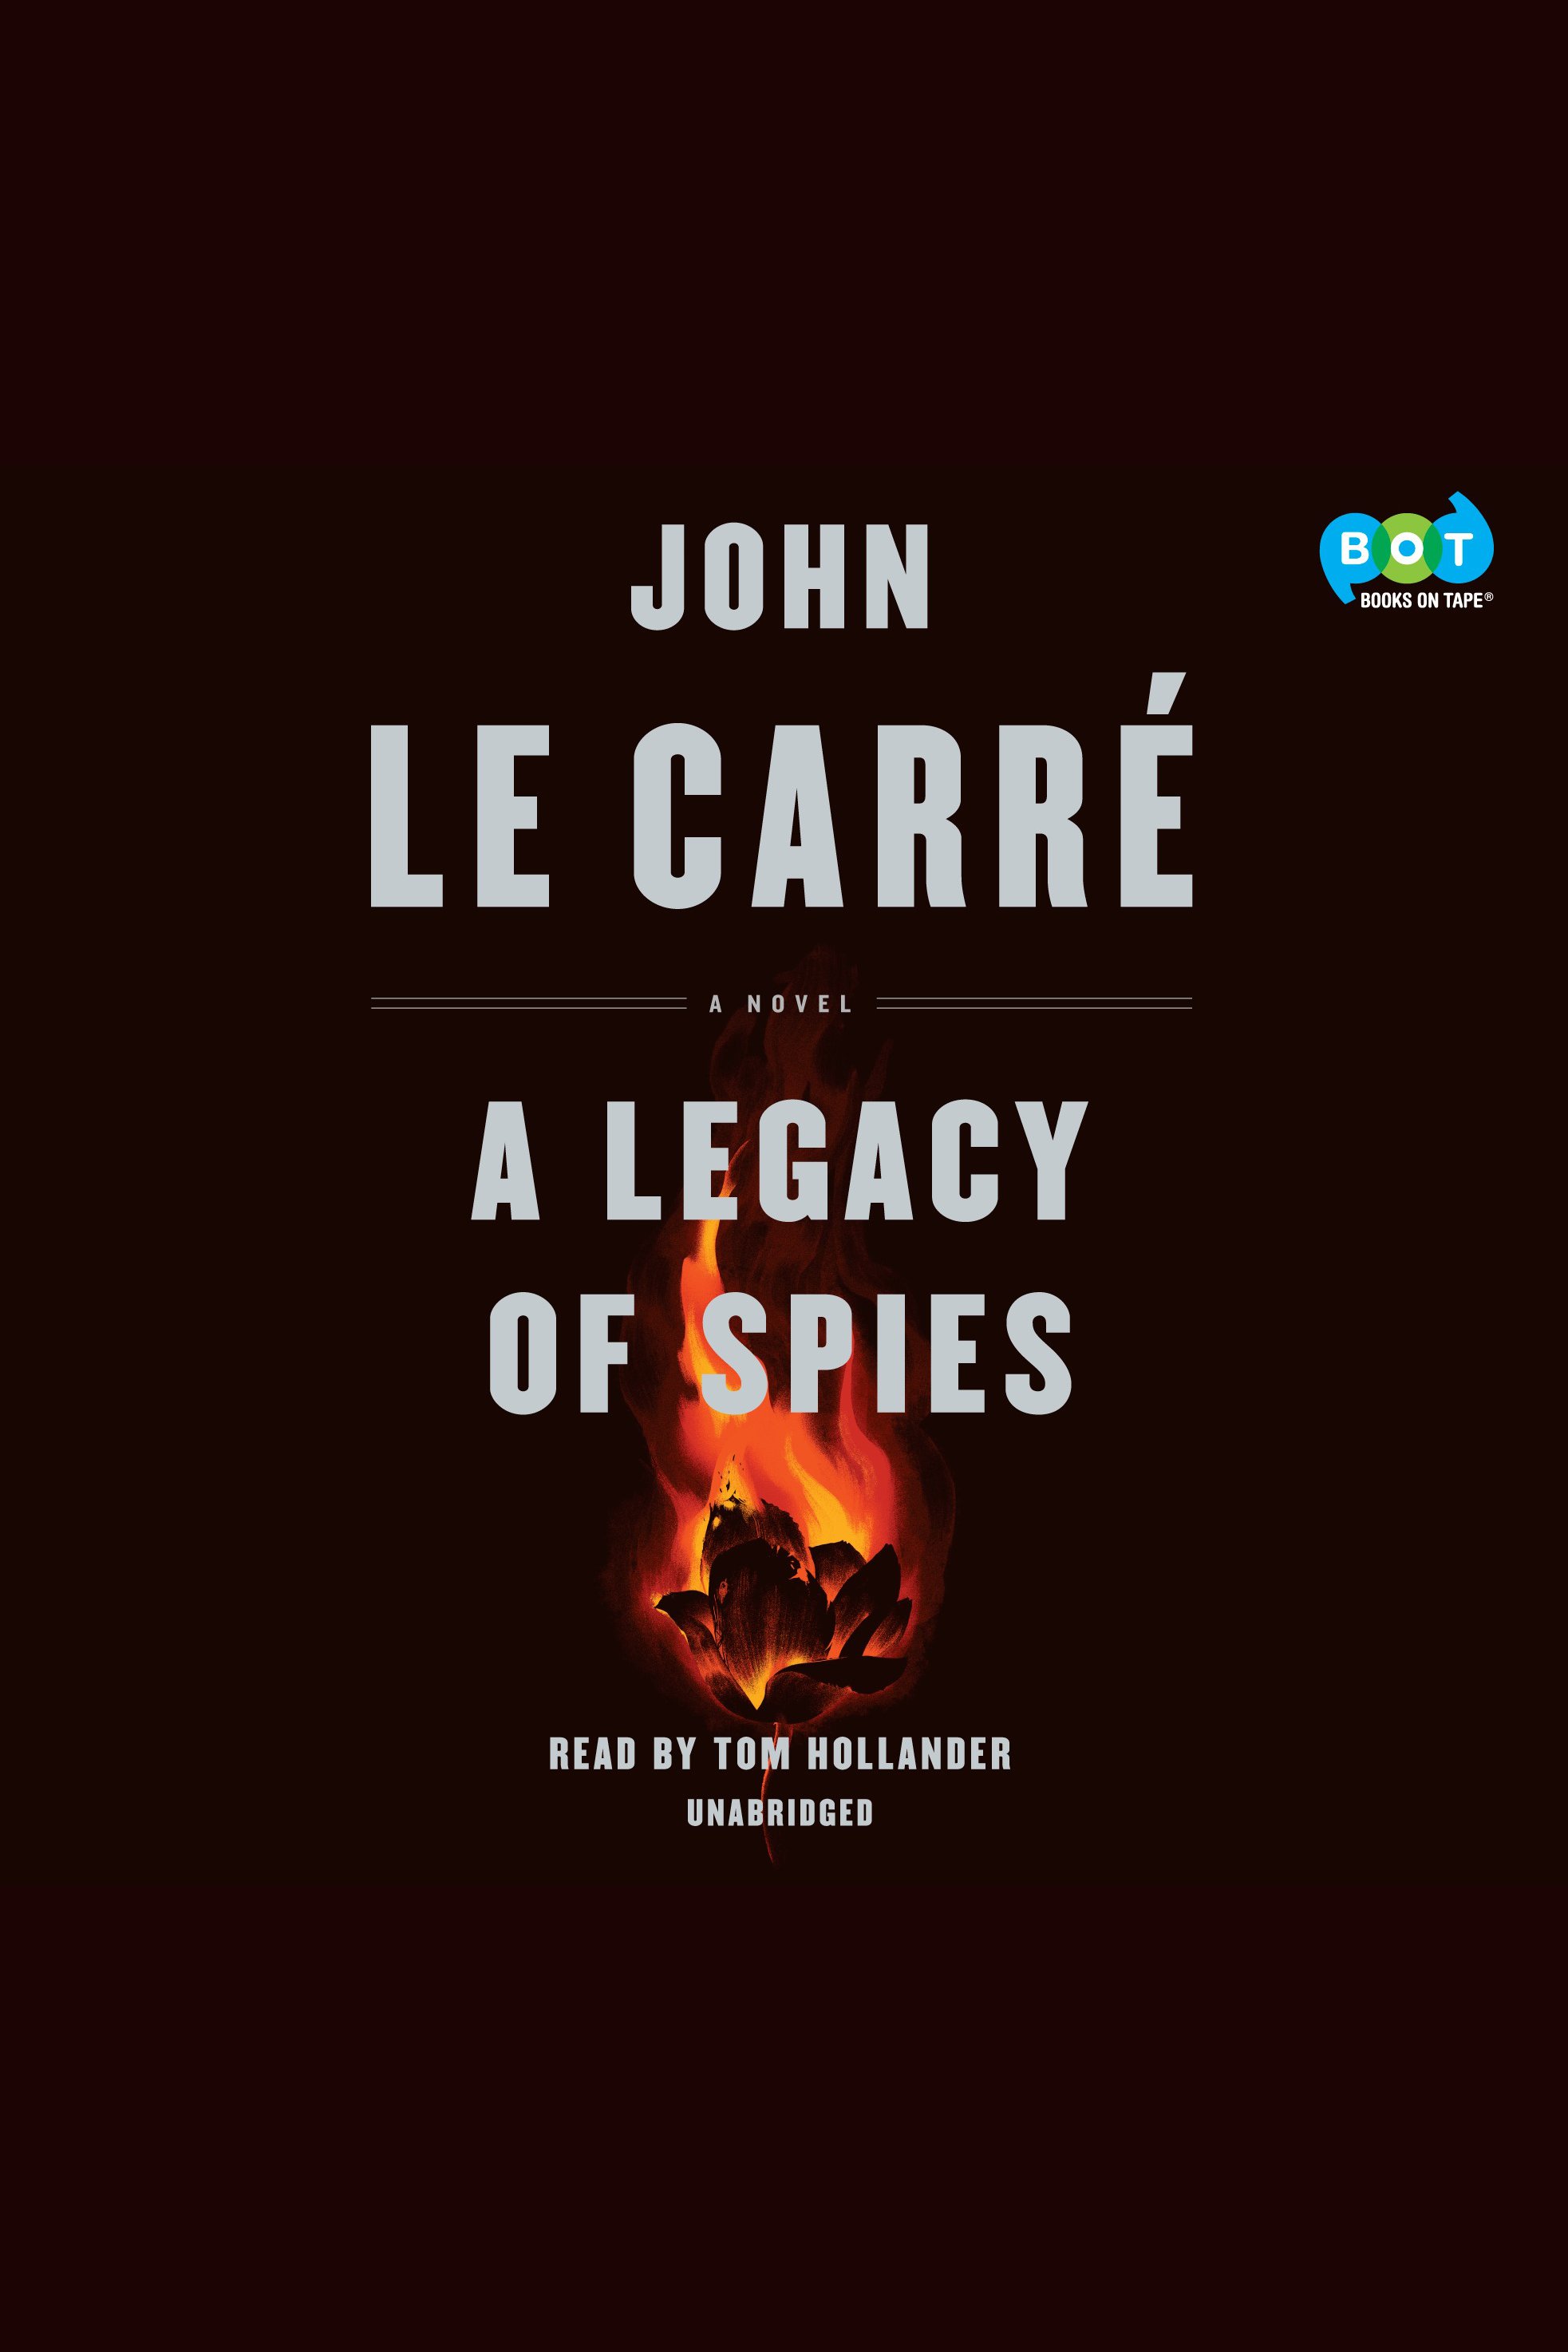 A legacy of spies cover image